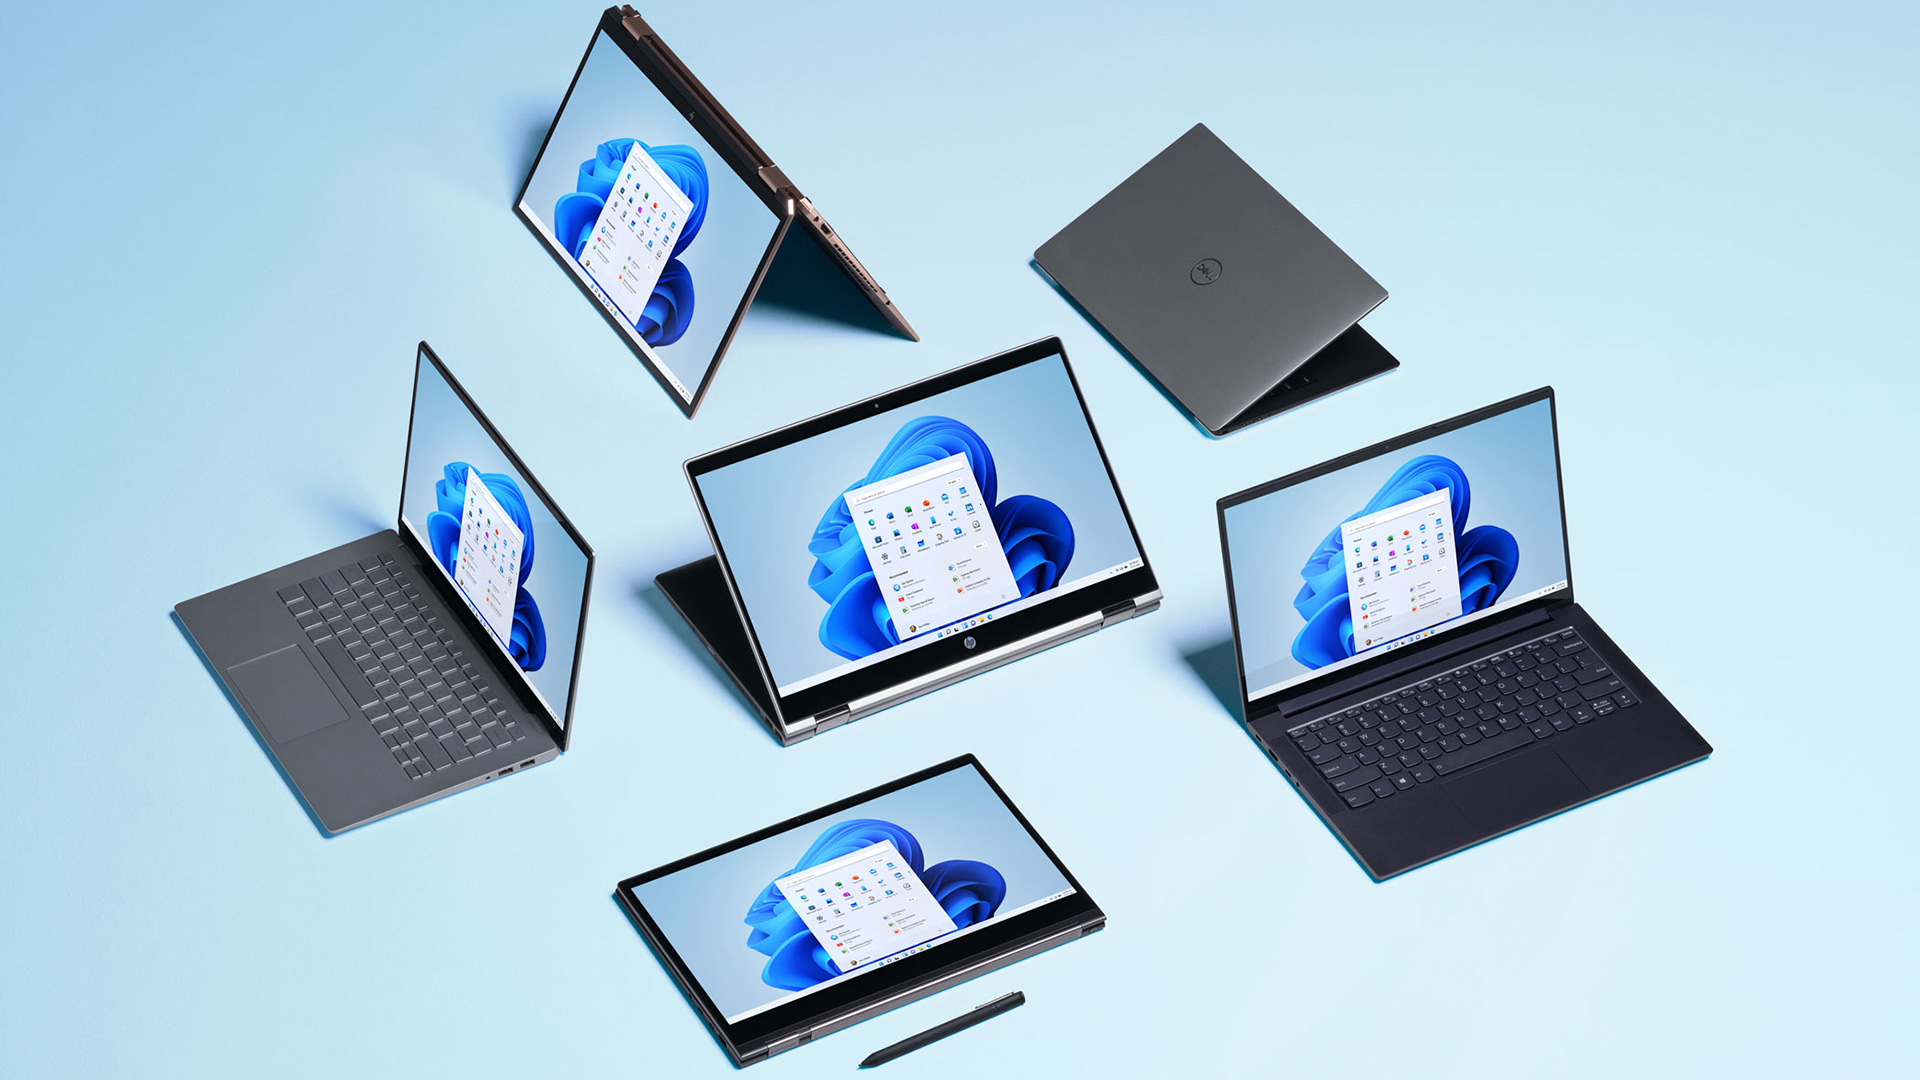 windows-11-insider-preview-devices.jpg